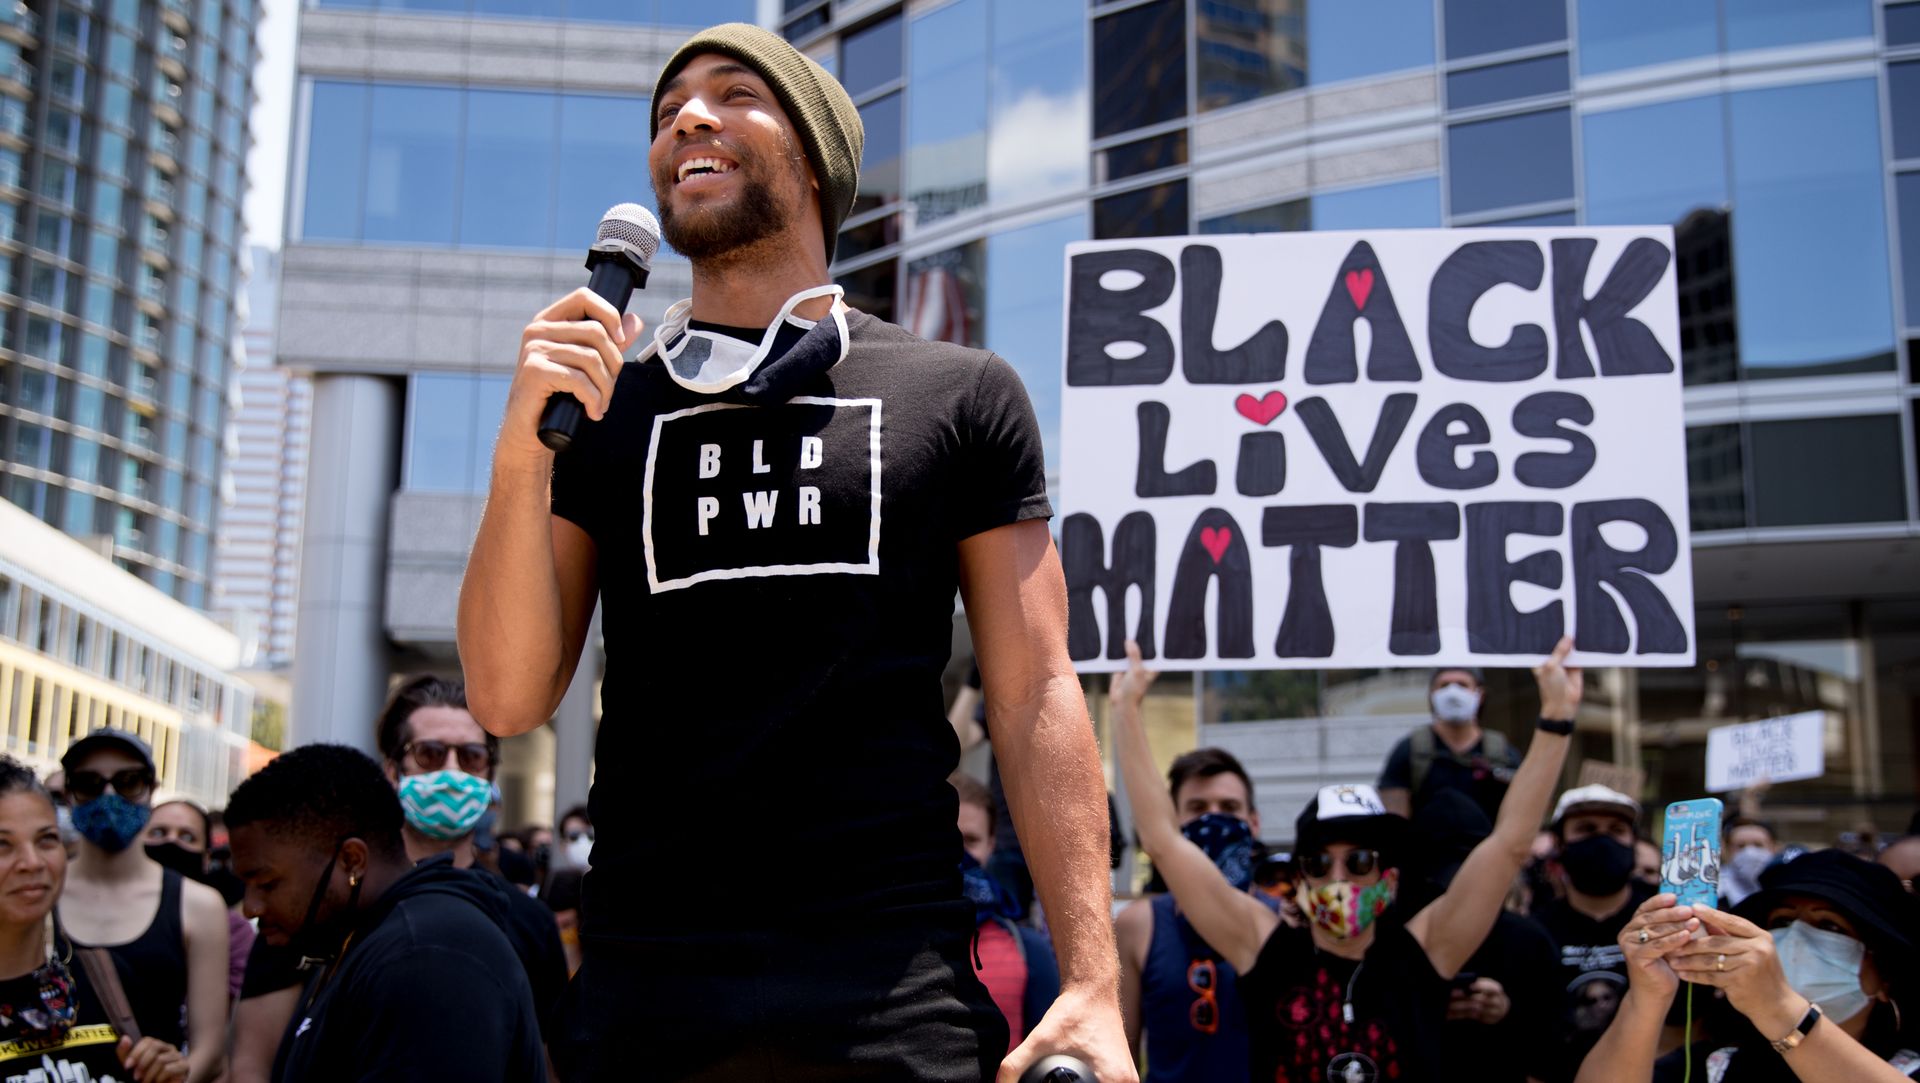 hollywood talent agencies march to support black lives matter protests